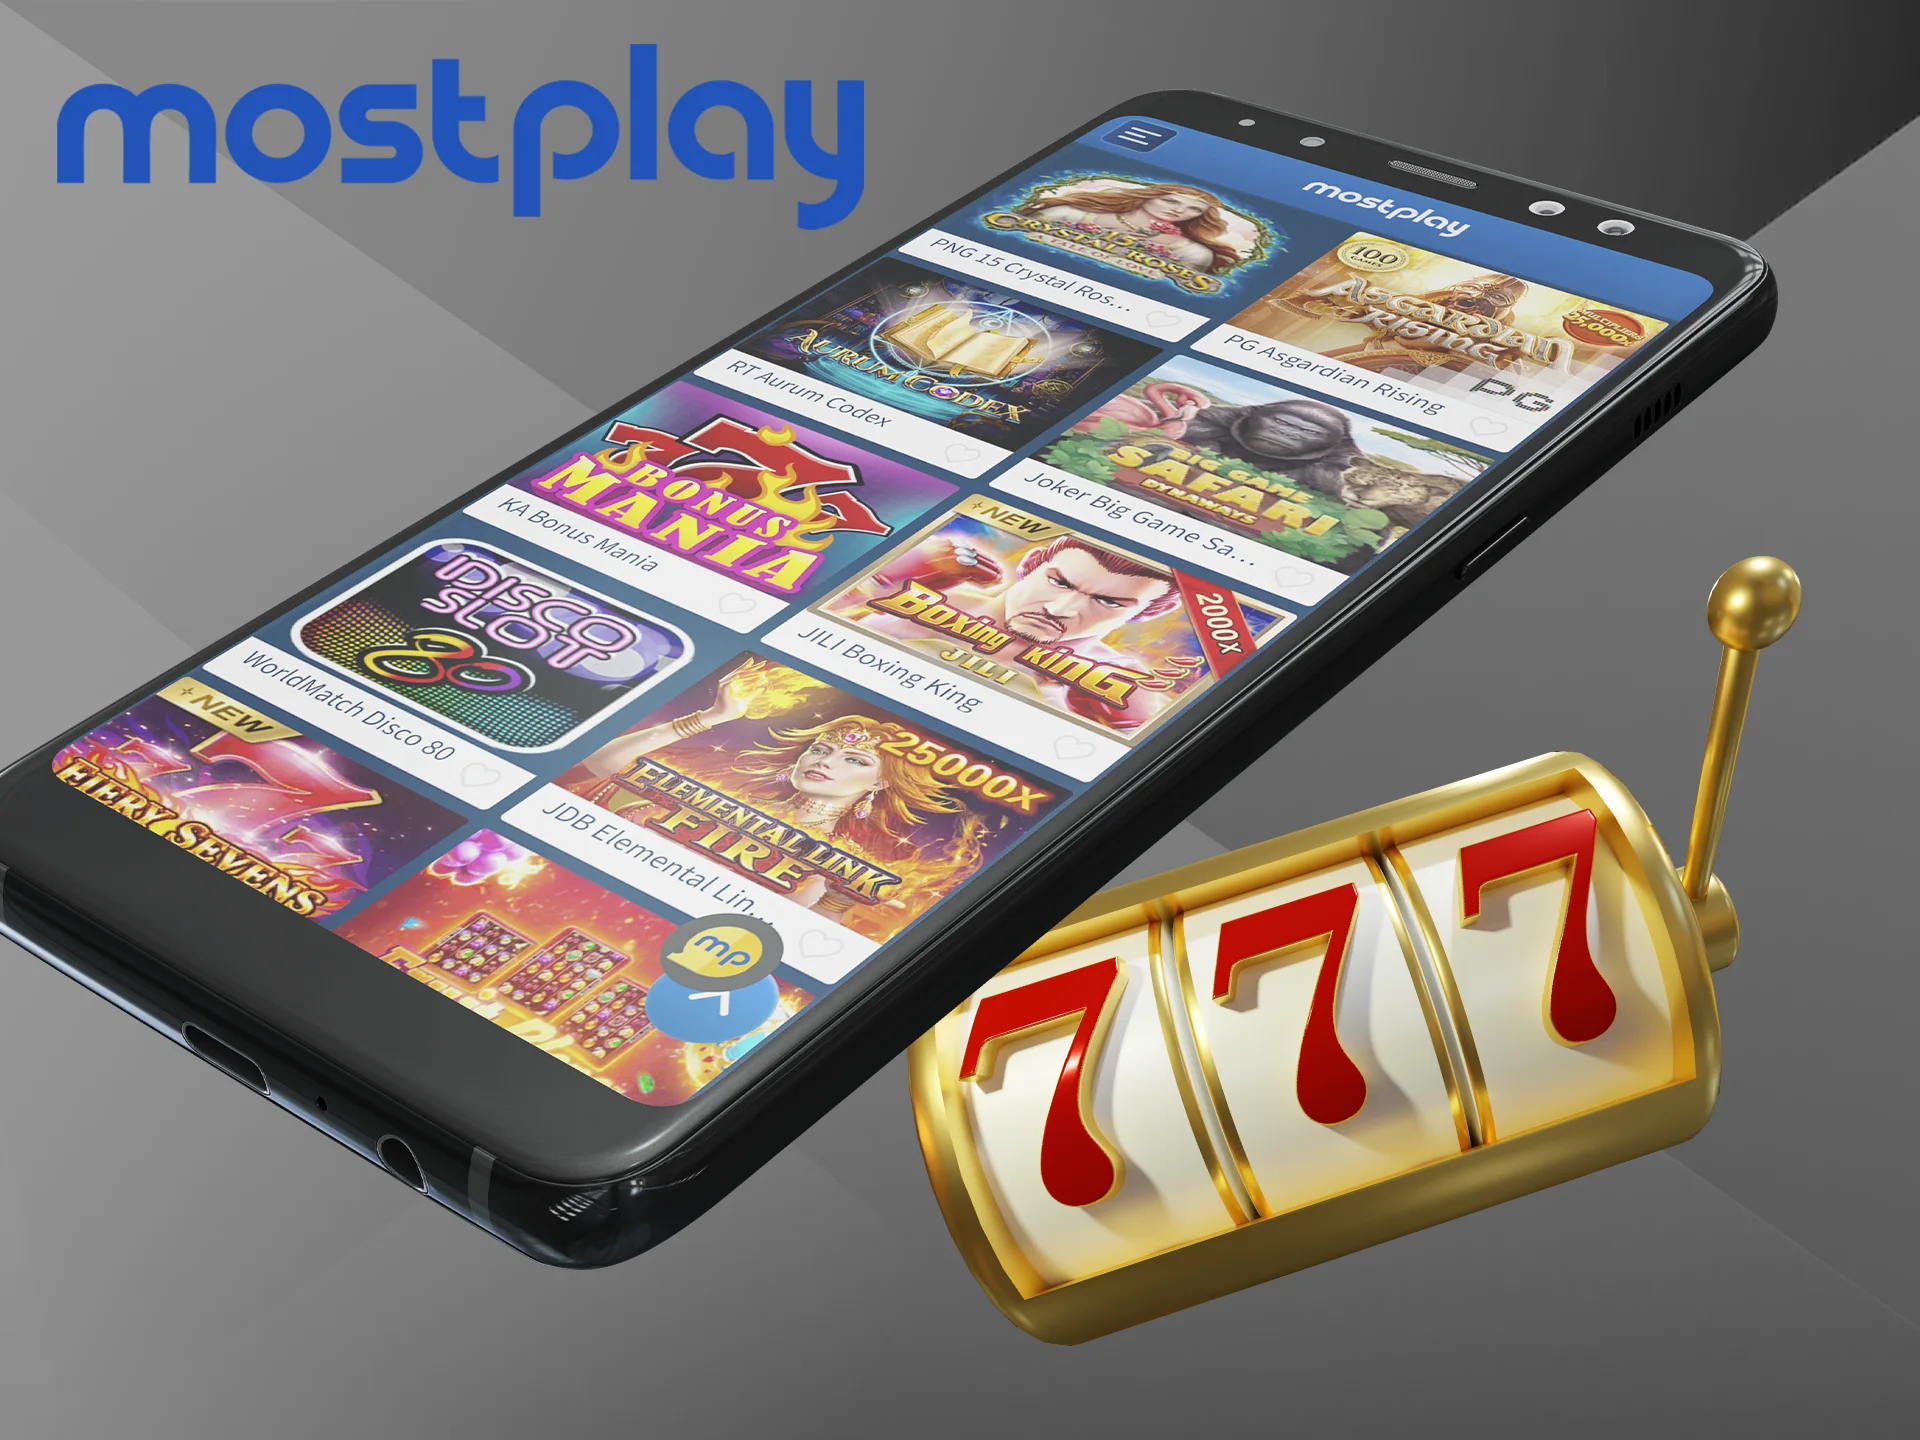 Only registered users can play slots at Mostplay.